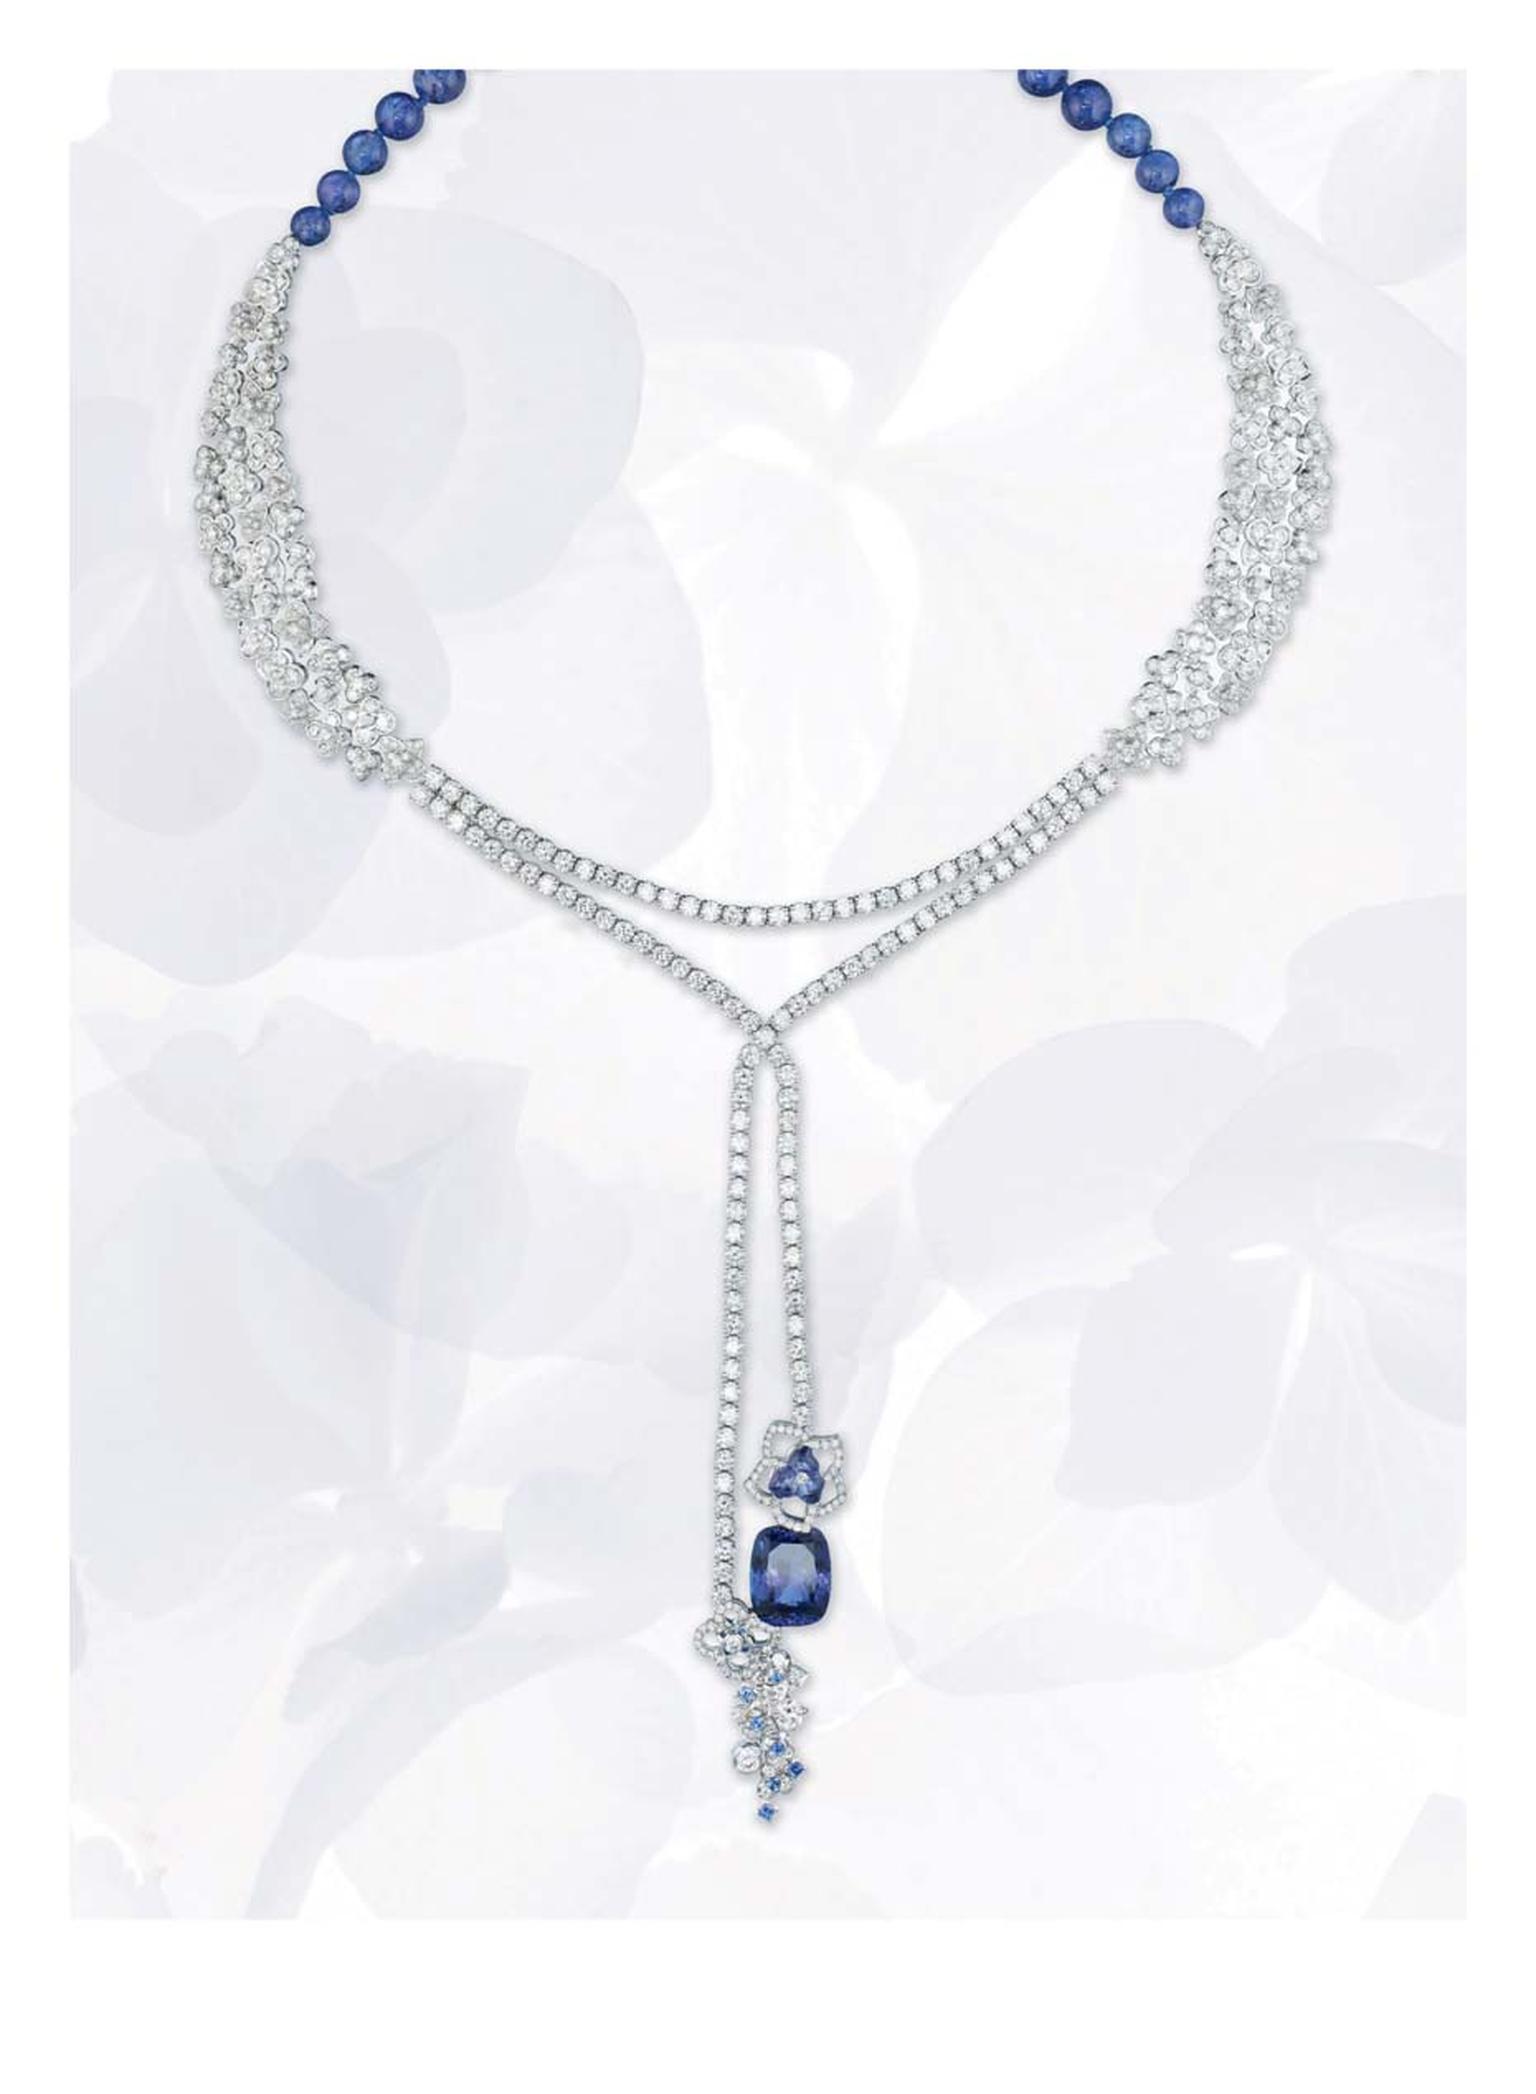 Chaumet Hortensia necklace in platinum with diamonds, tanzanite, sapphires and a cushion-cut 10.73ct tanzanite.